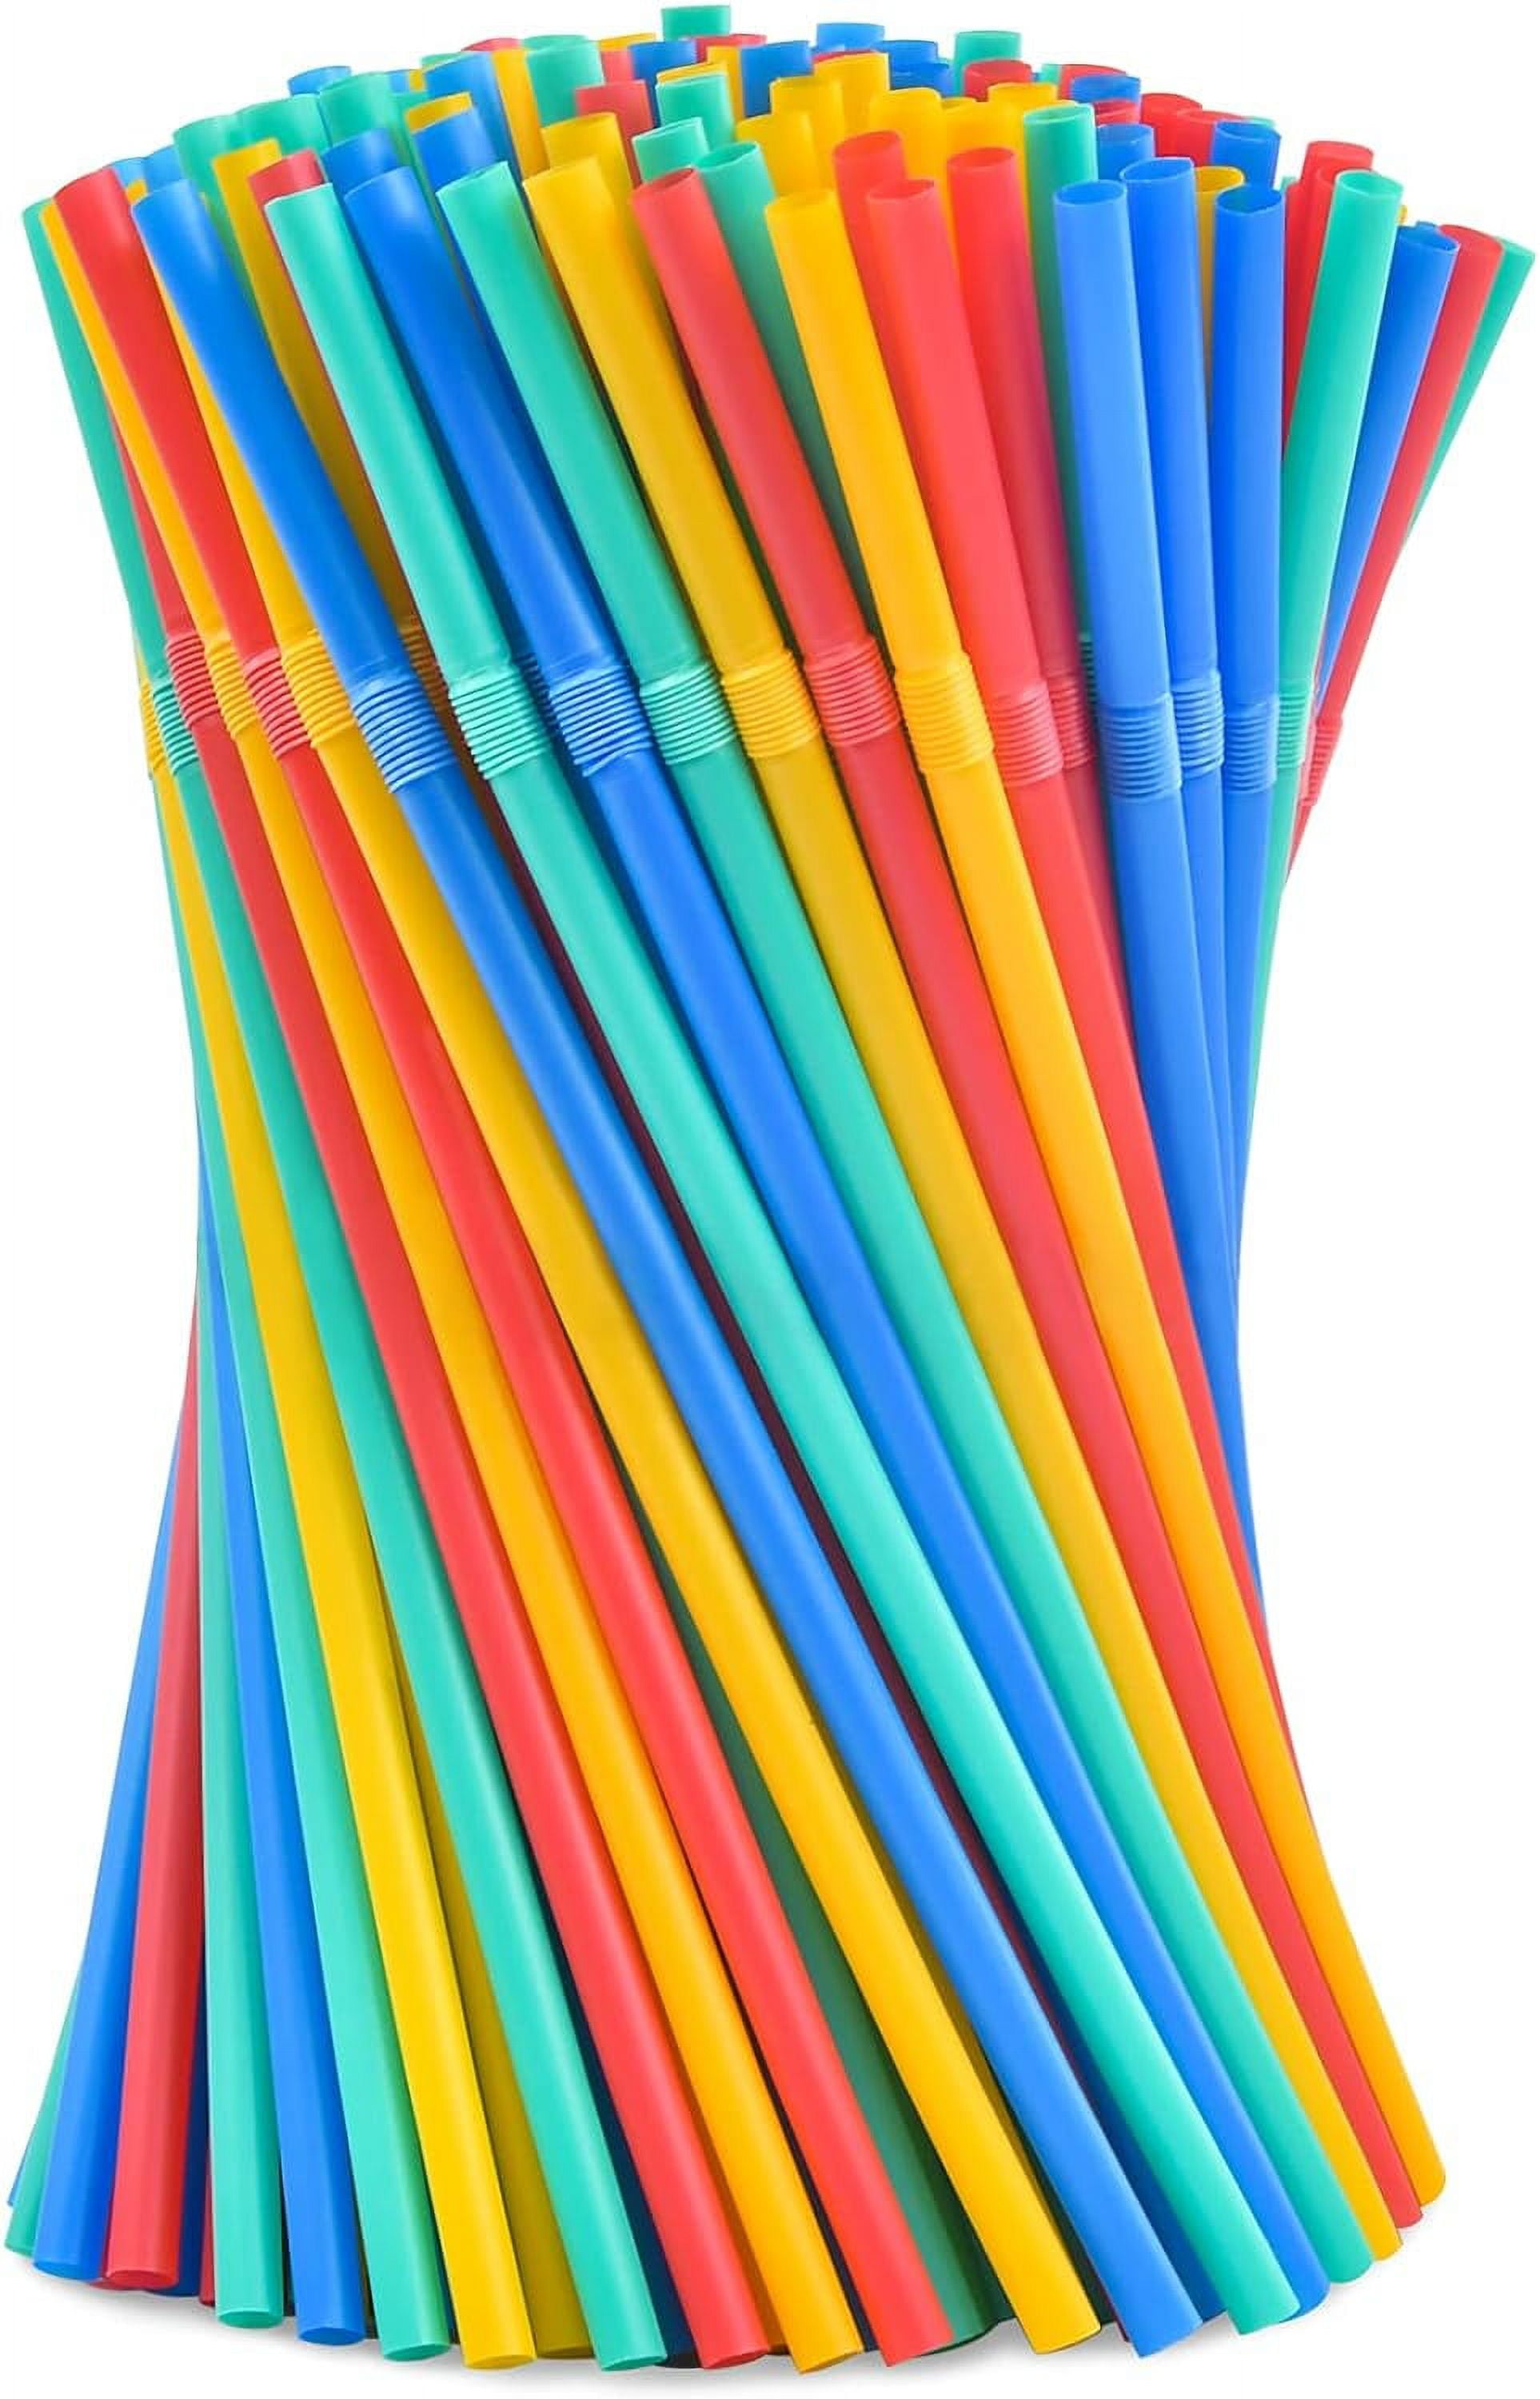 Oriental Trading Company Disposable Plastic Straws & Drink Accessories for  50 Guests